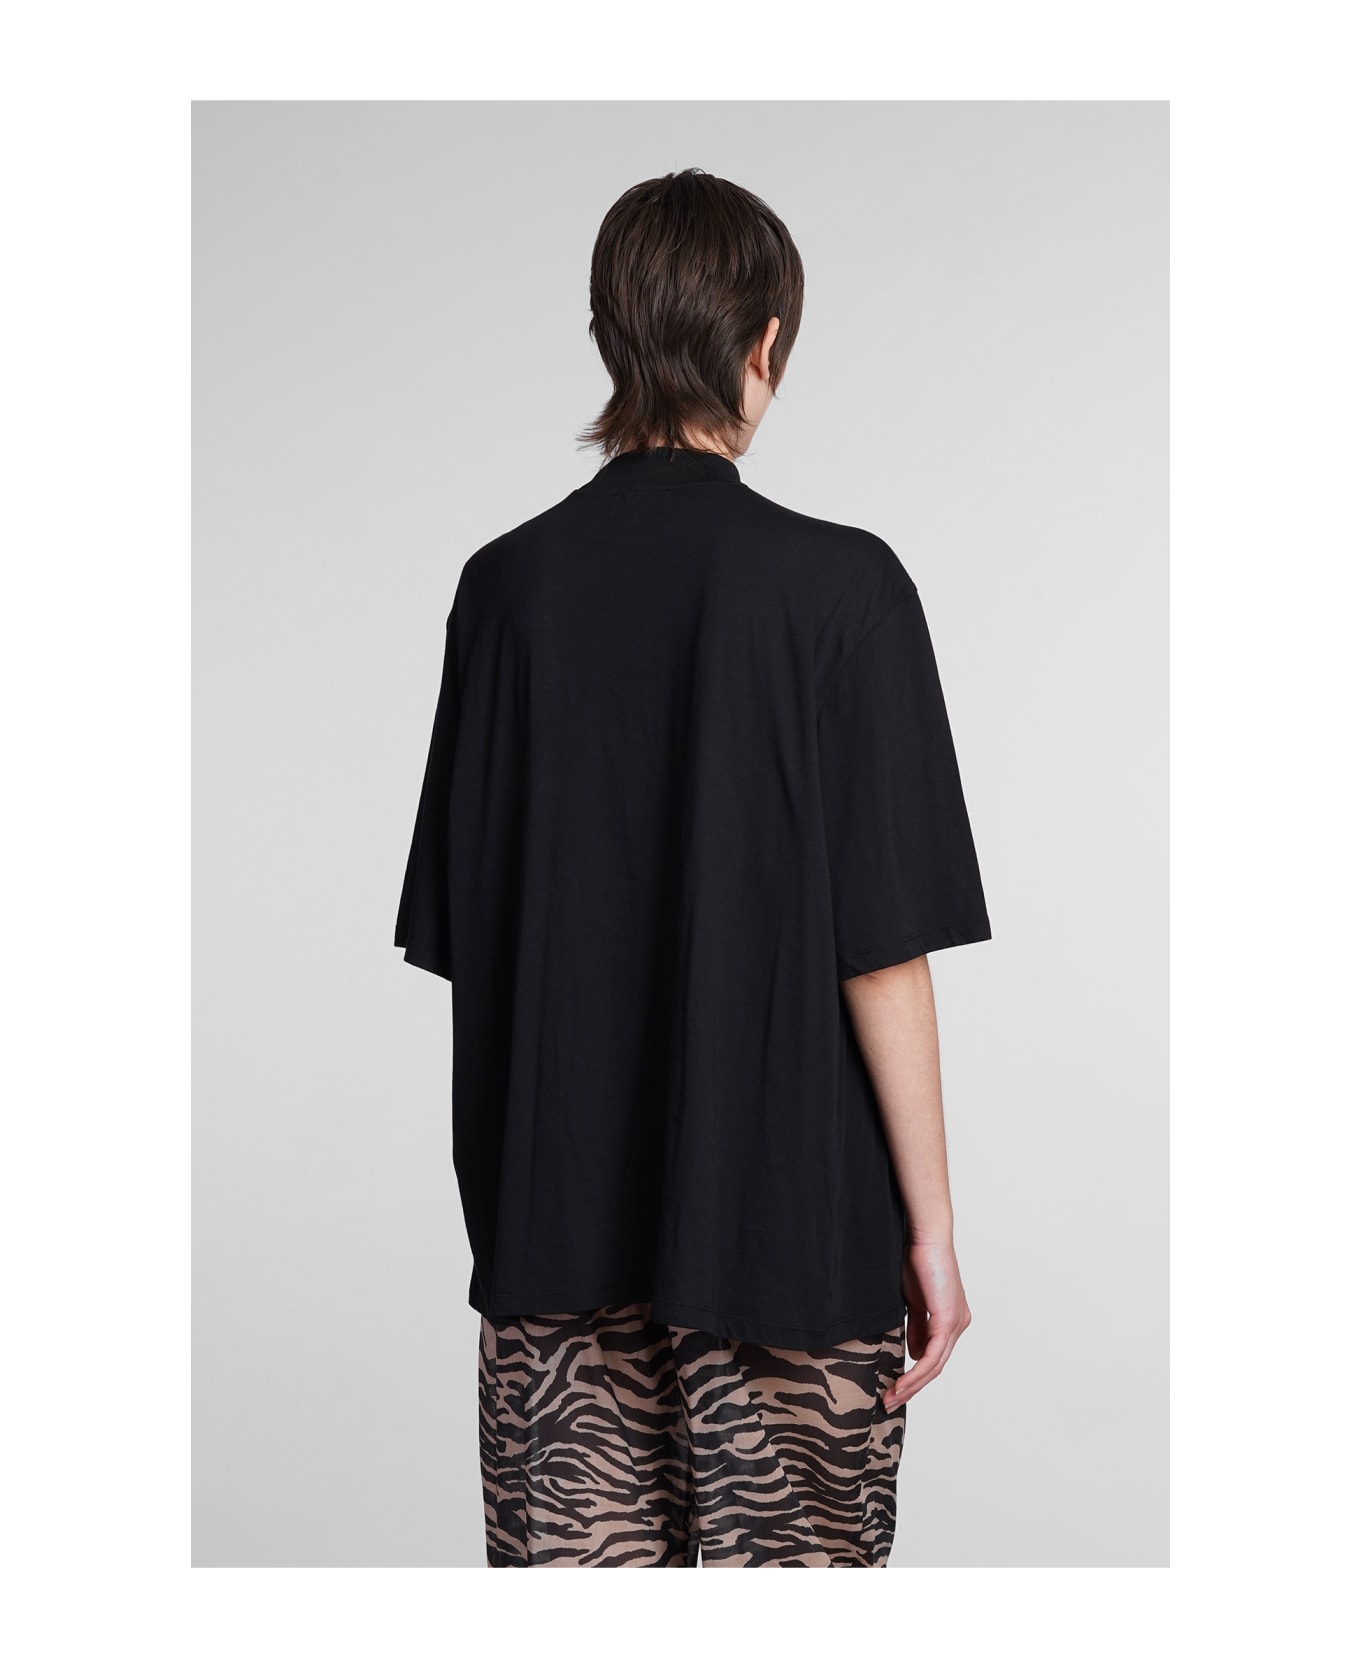 The Attico Oversized T-shirt From The 'join Us At The Beach' Collection - black